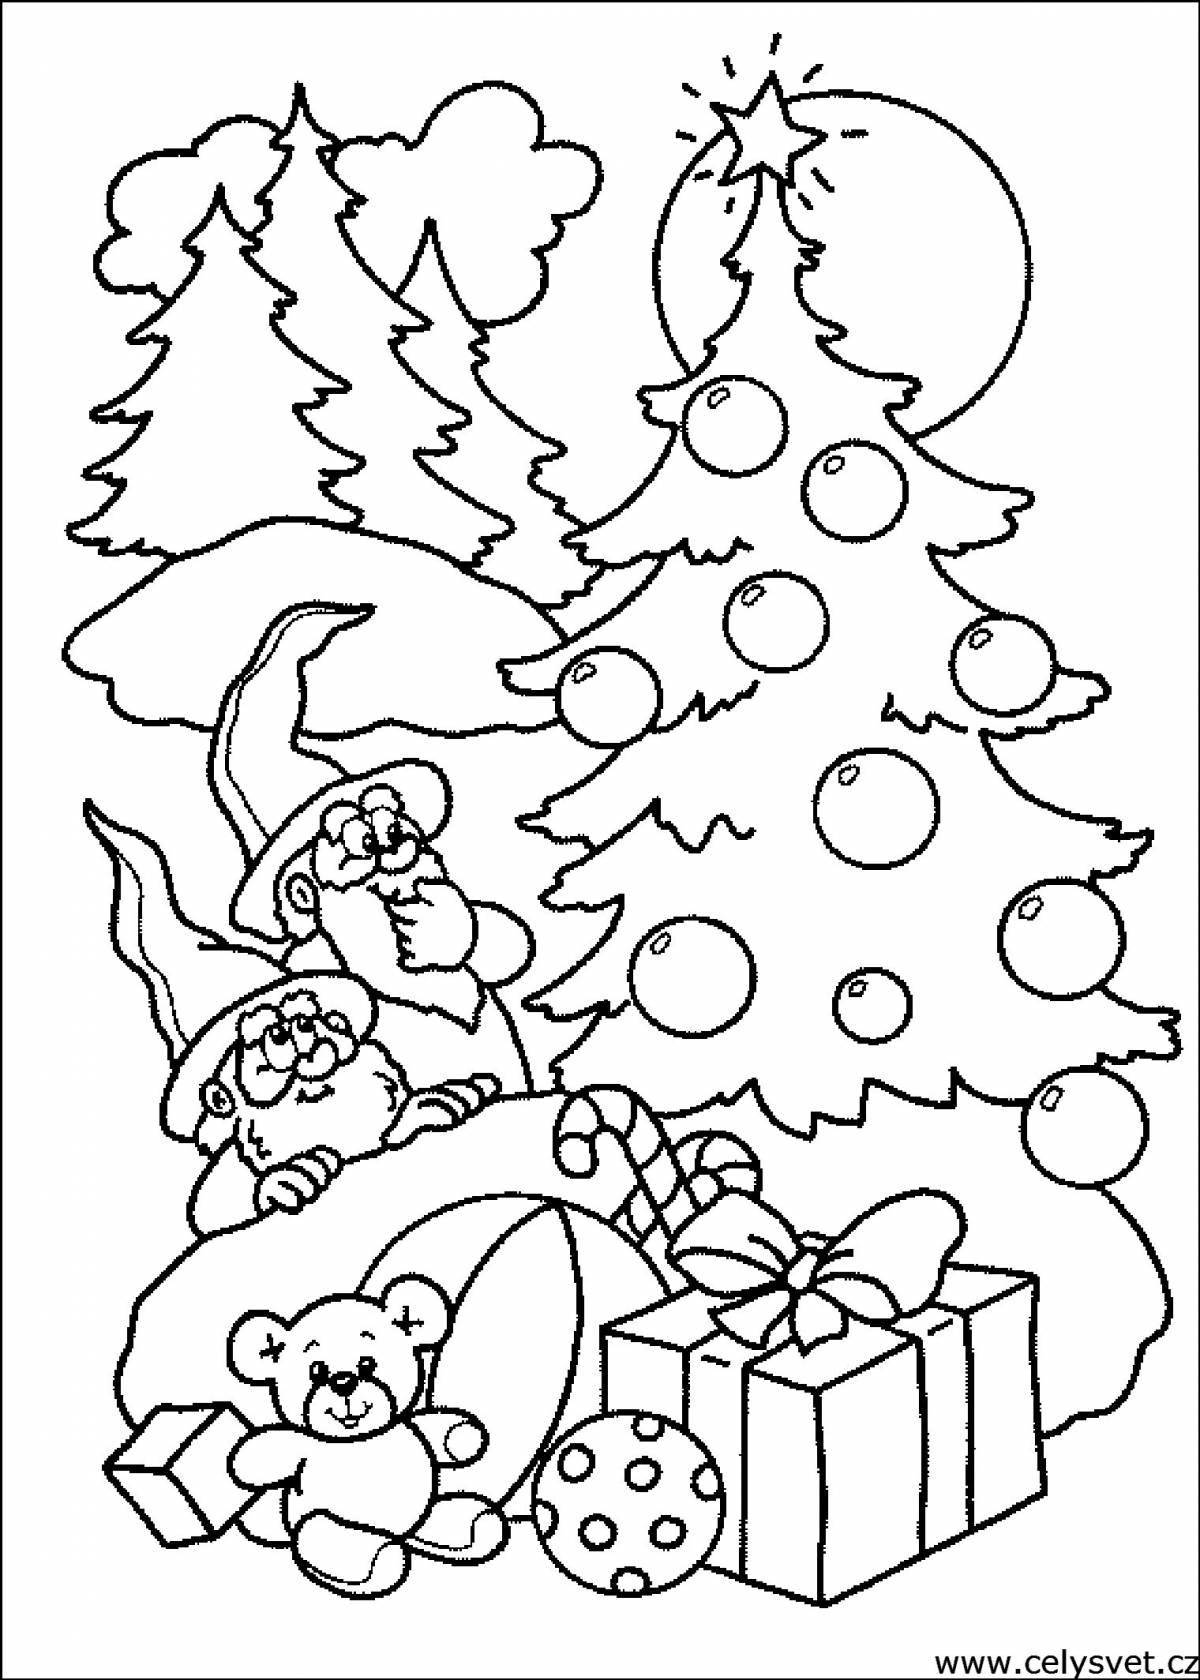 Glowing Christmas coloring book for kids